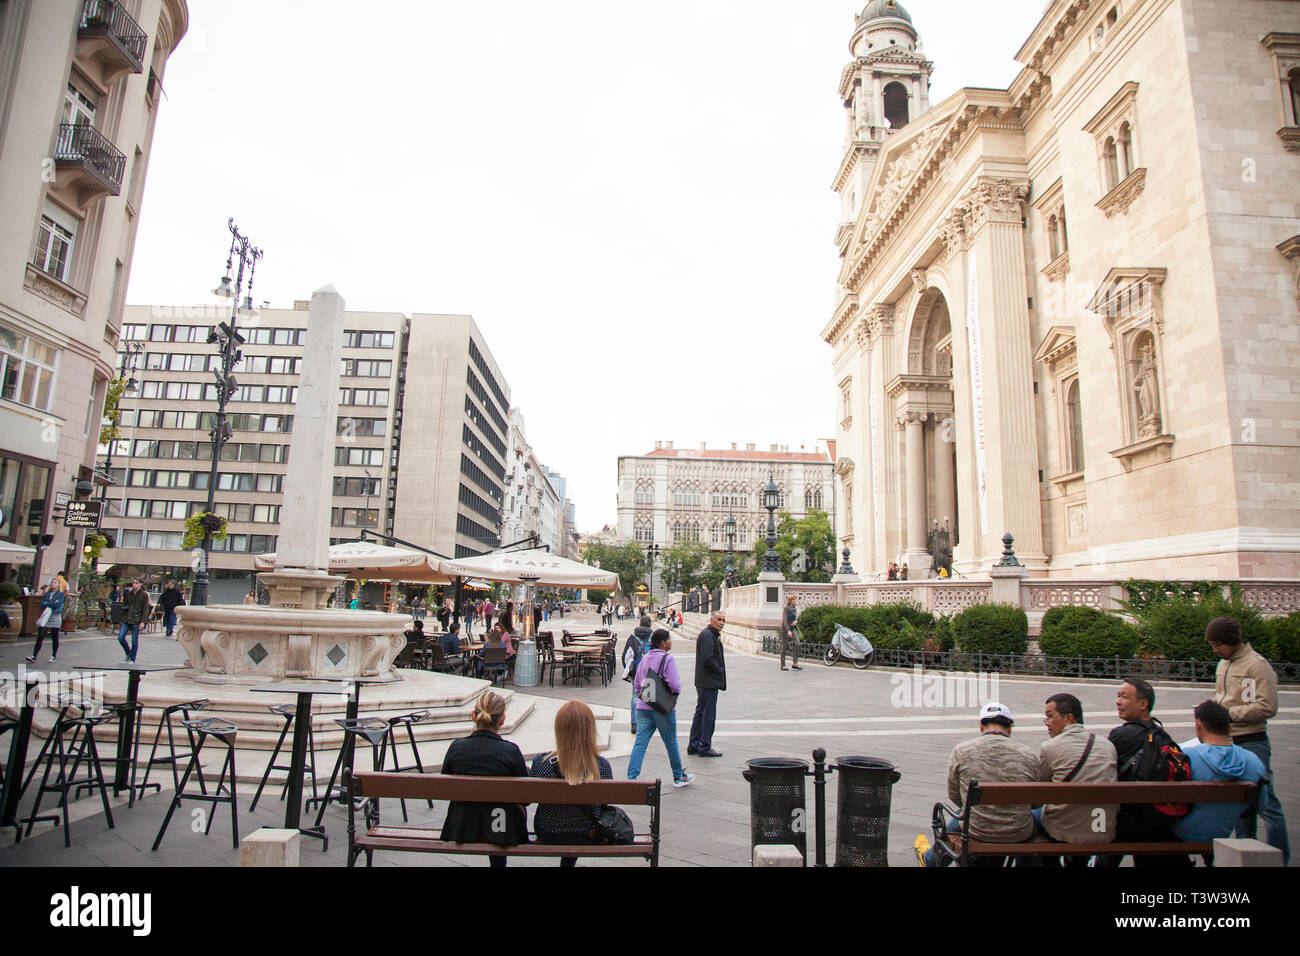 BUDAPEST, HUNGARY - SEPTEMBER 20, 2017: The square in front of St. Stephens Basilica in Budapest, is surrounded by restaurants and patios where many p Stock Photo